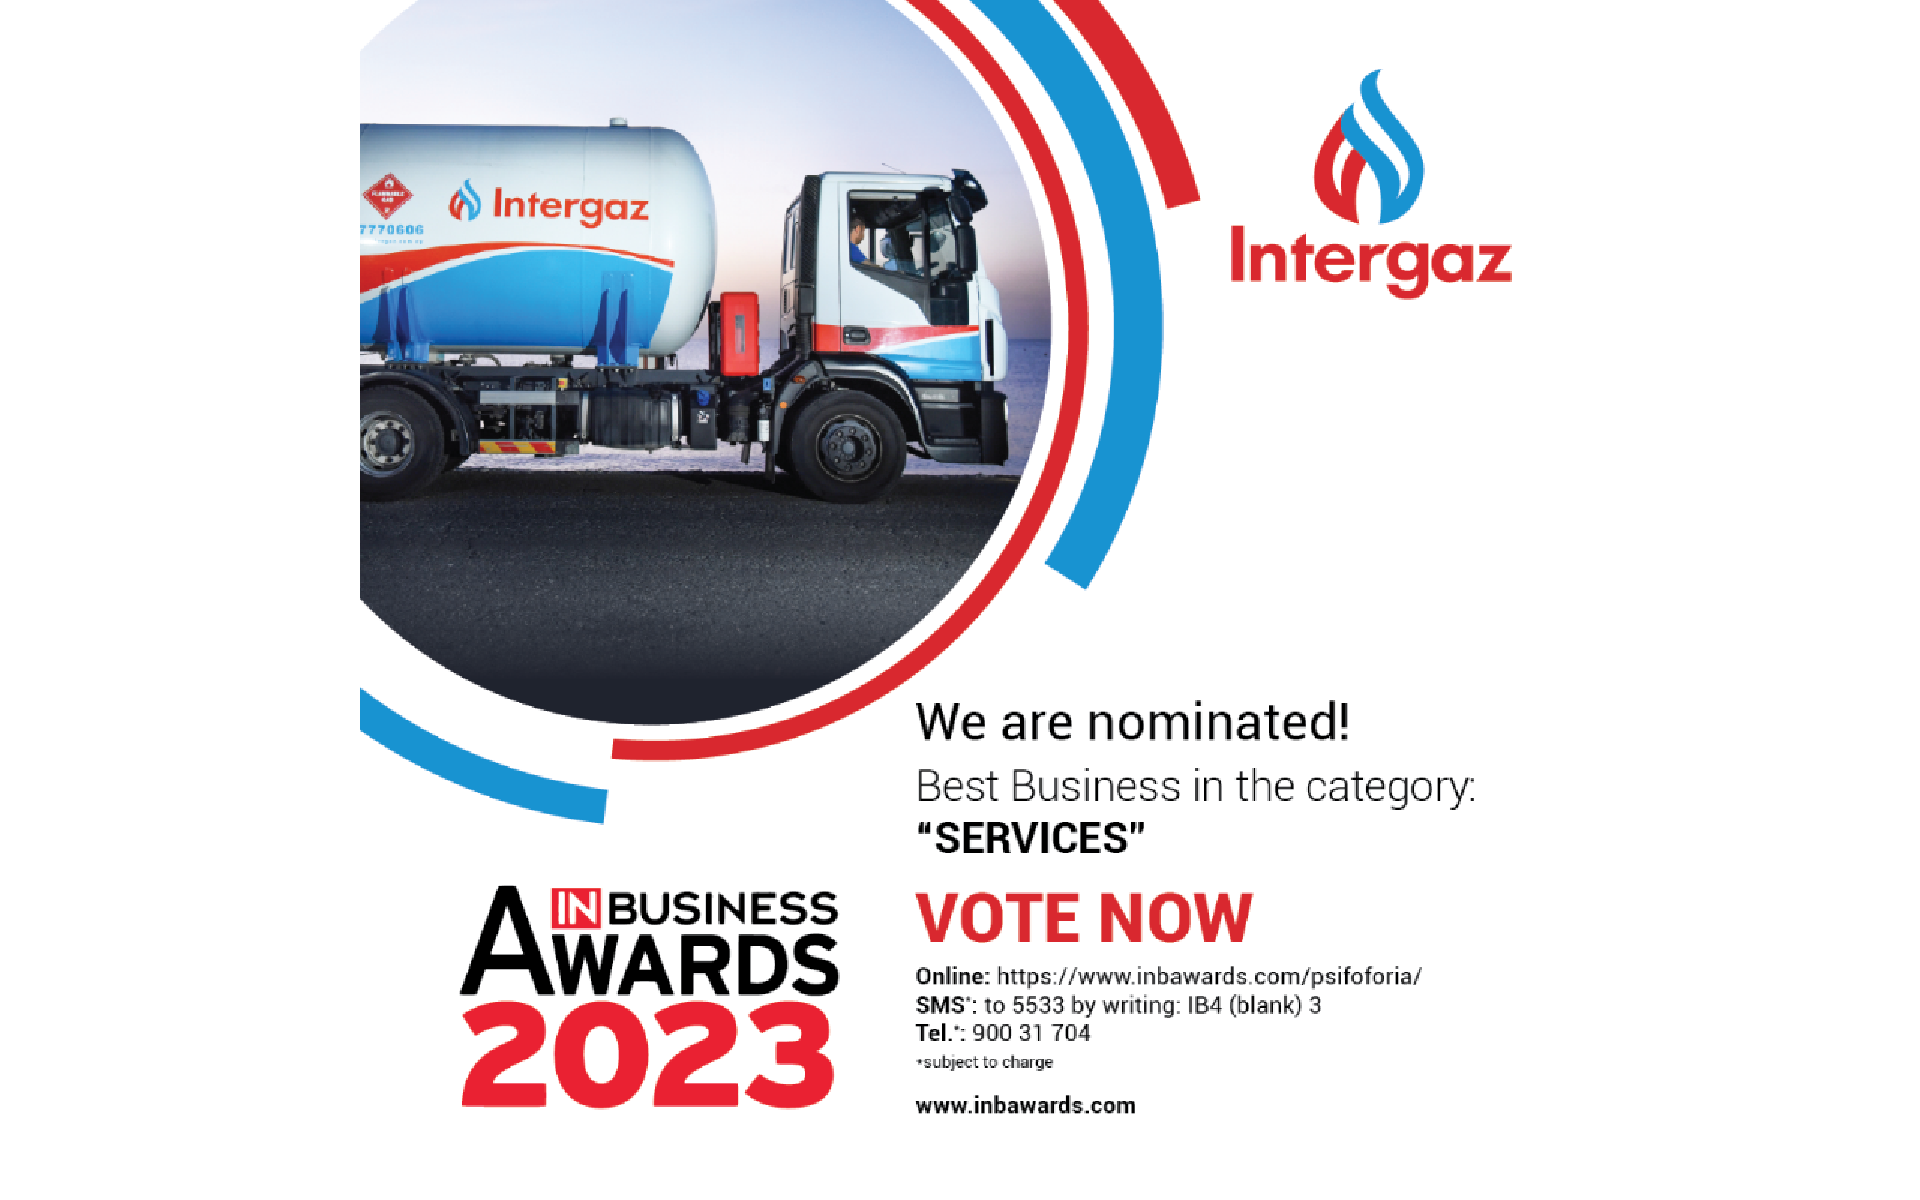 Image for InBusiness Awards 2023 - We are nominated! Best Business (Services)